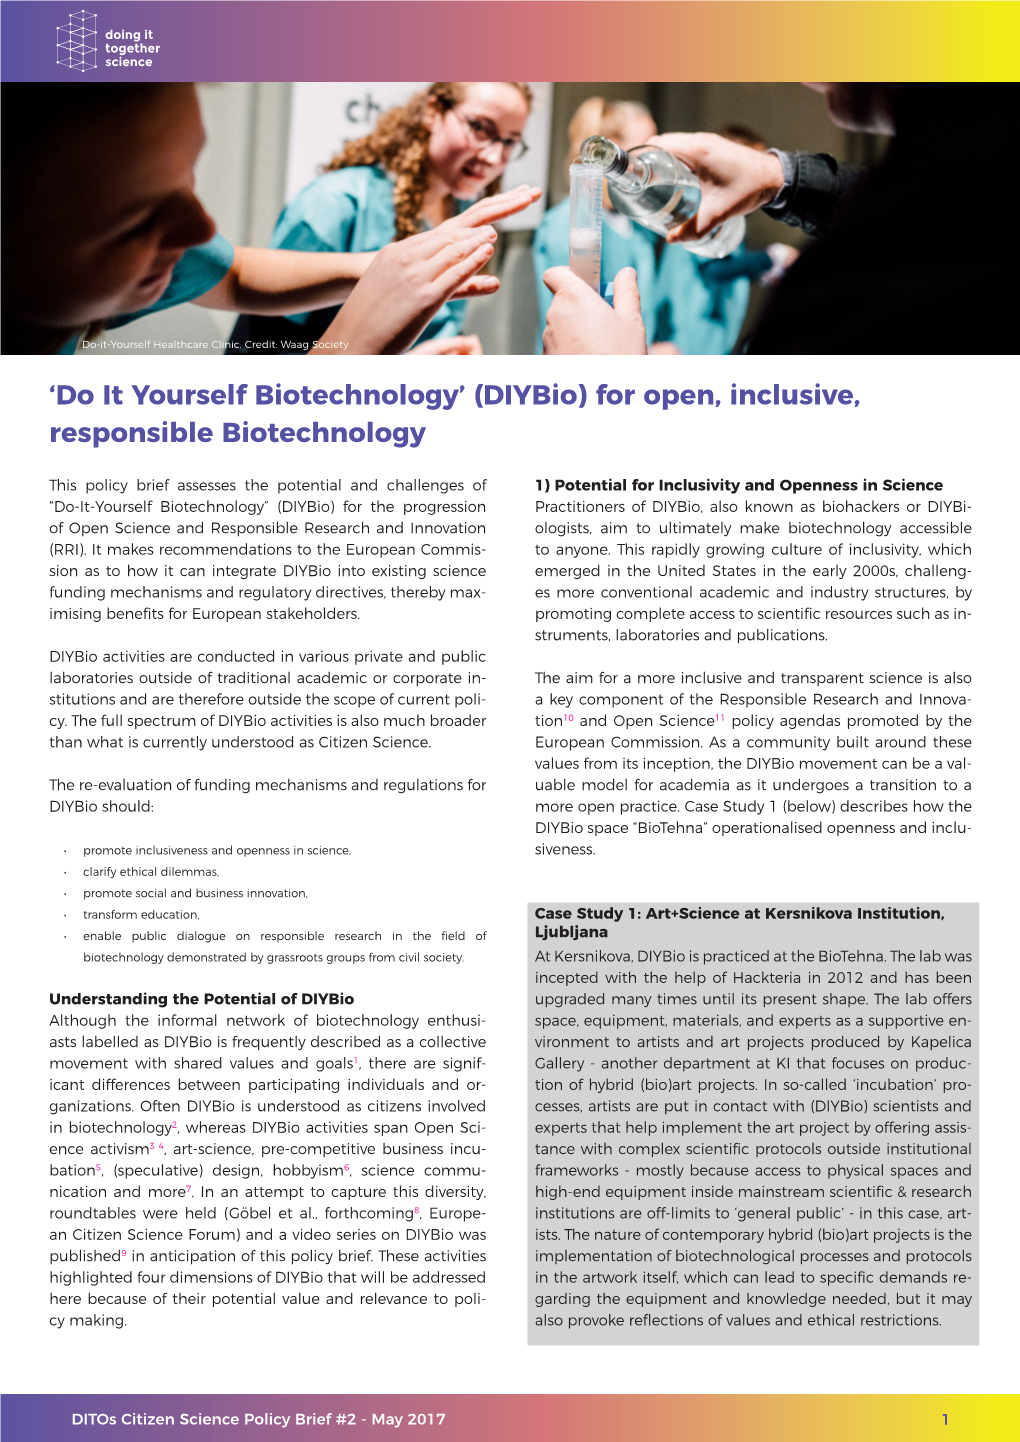 'Do It Yourself Biotechnology' (Diybio) for Open, Inclusive